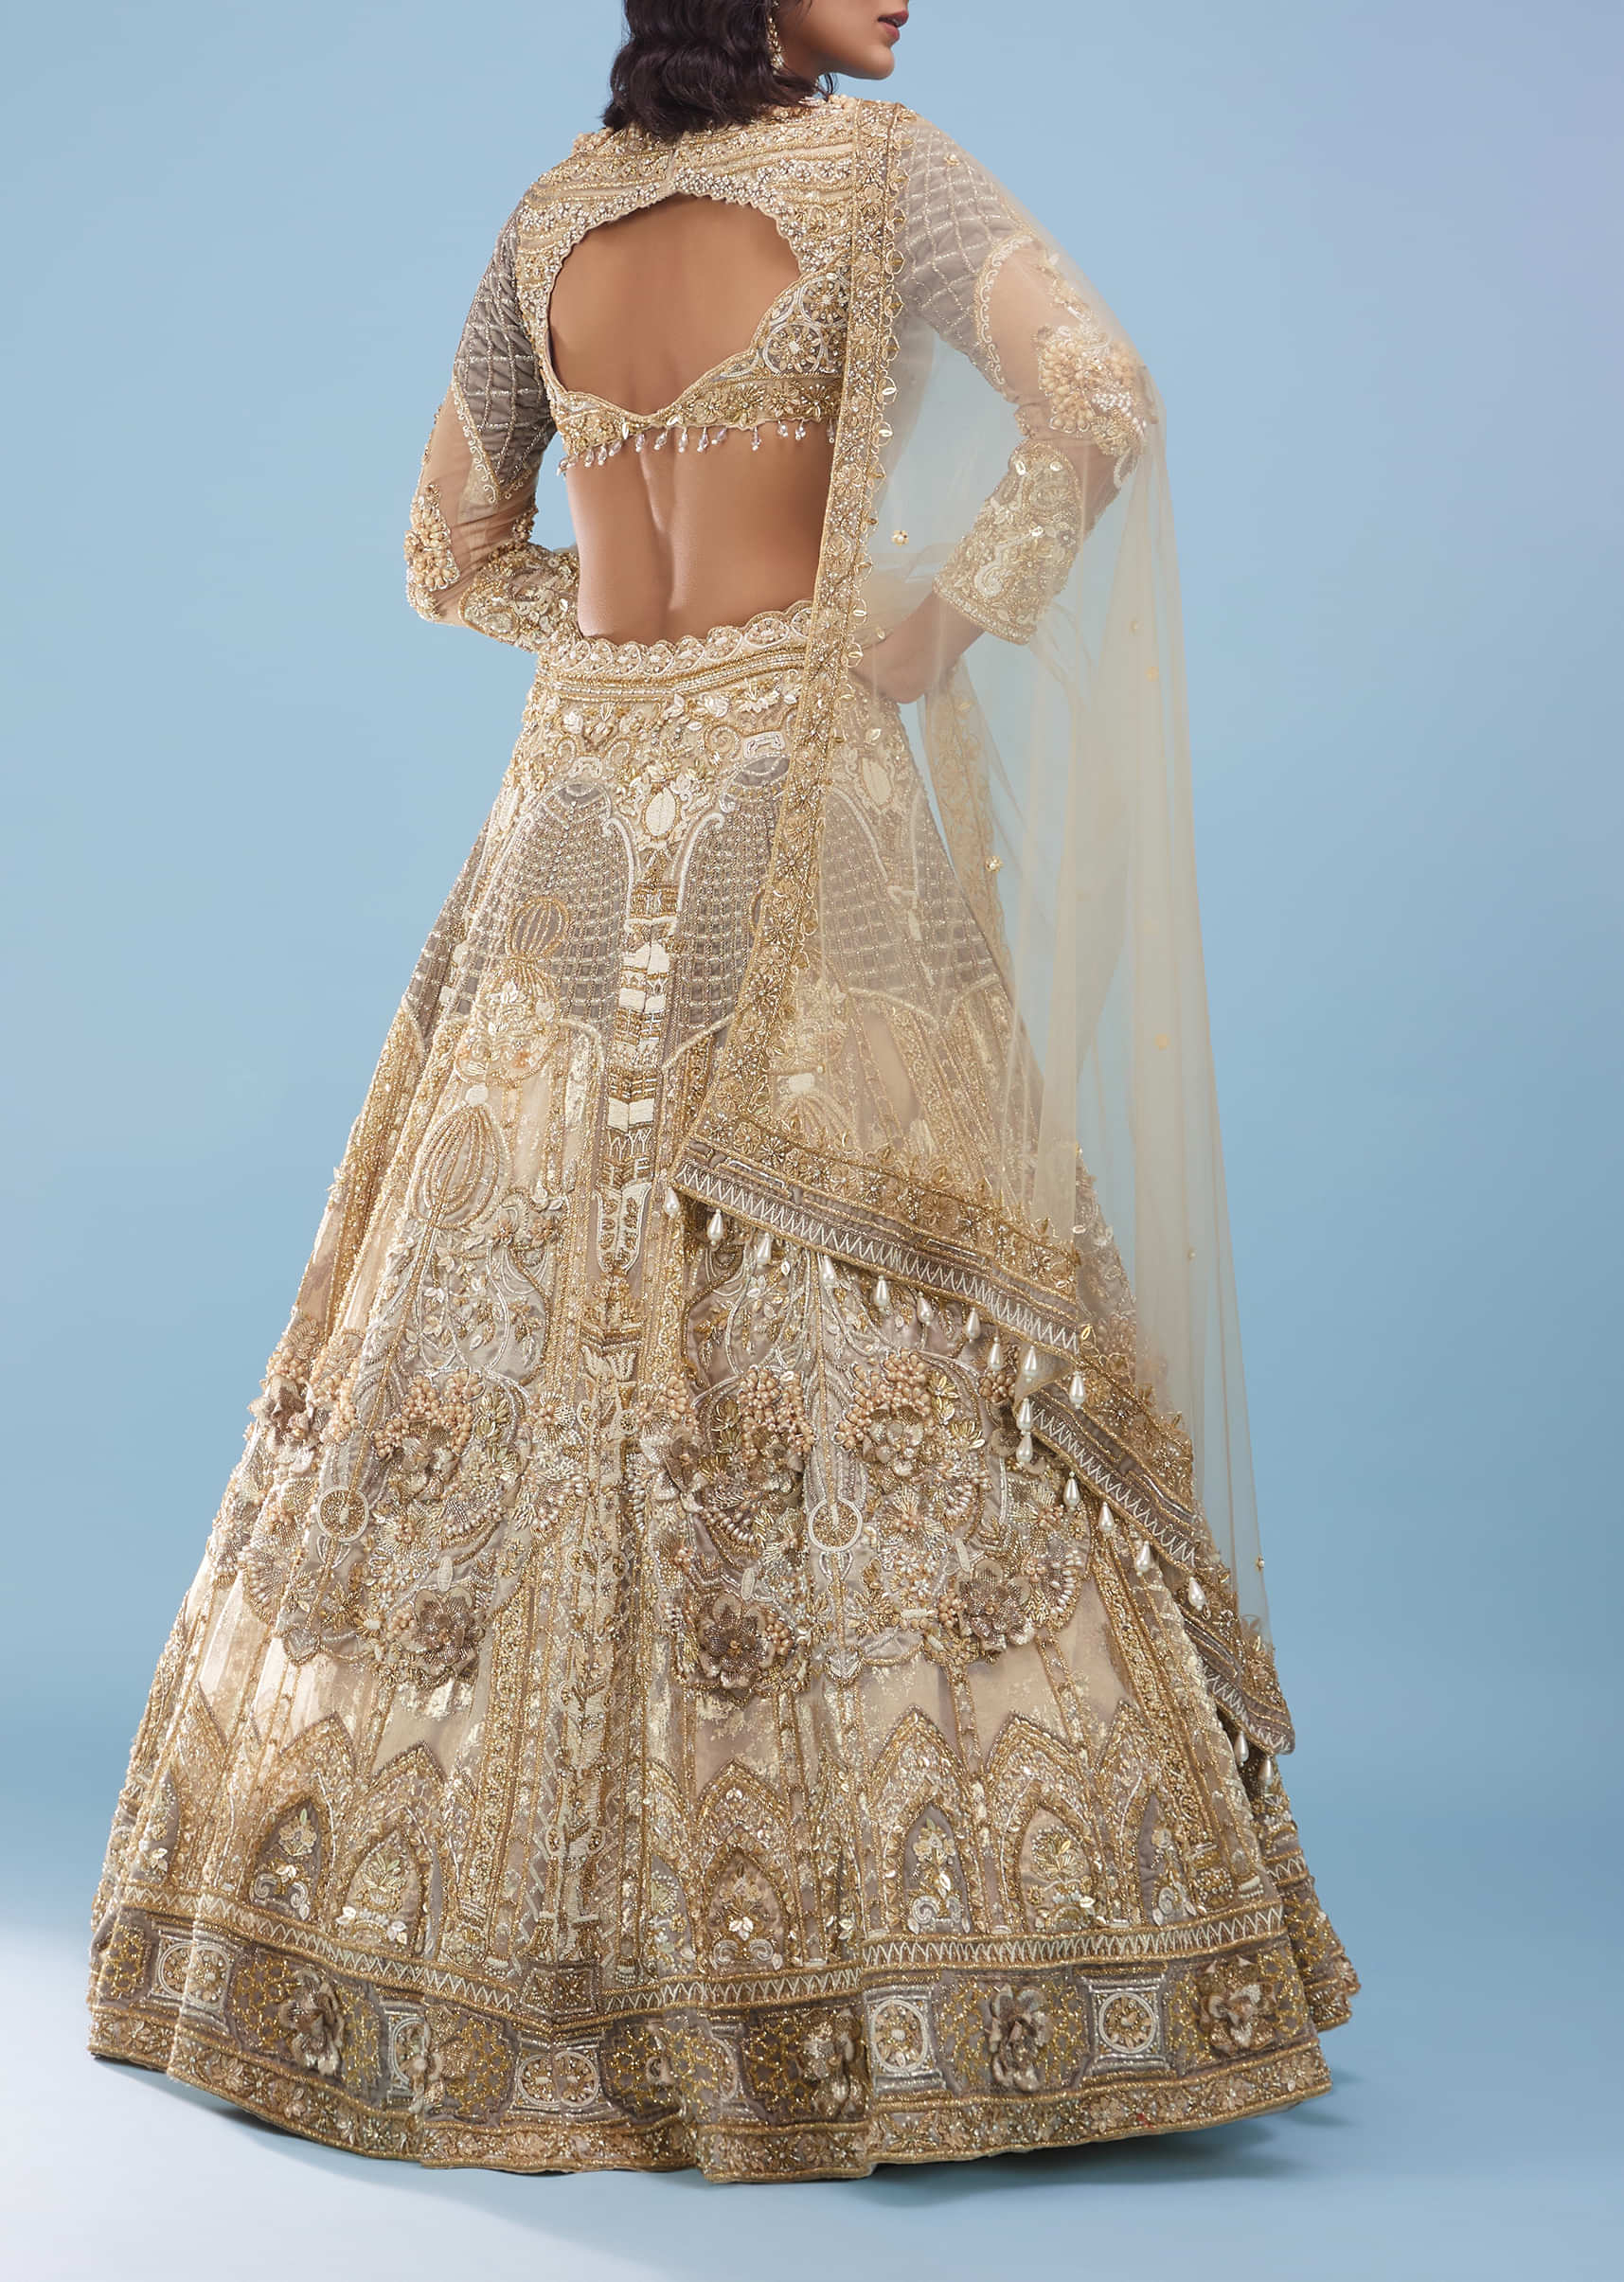 Bridal Riwaayat Off White Lehenga In Organza With 3D Heavy Embroidery - NOOR 2022